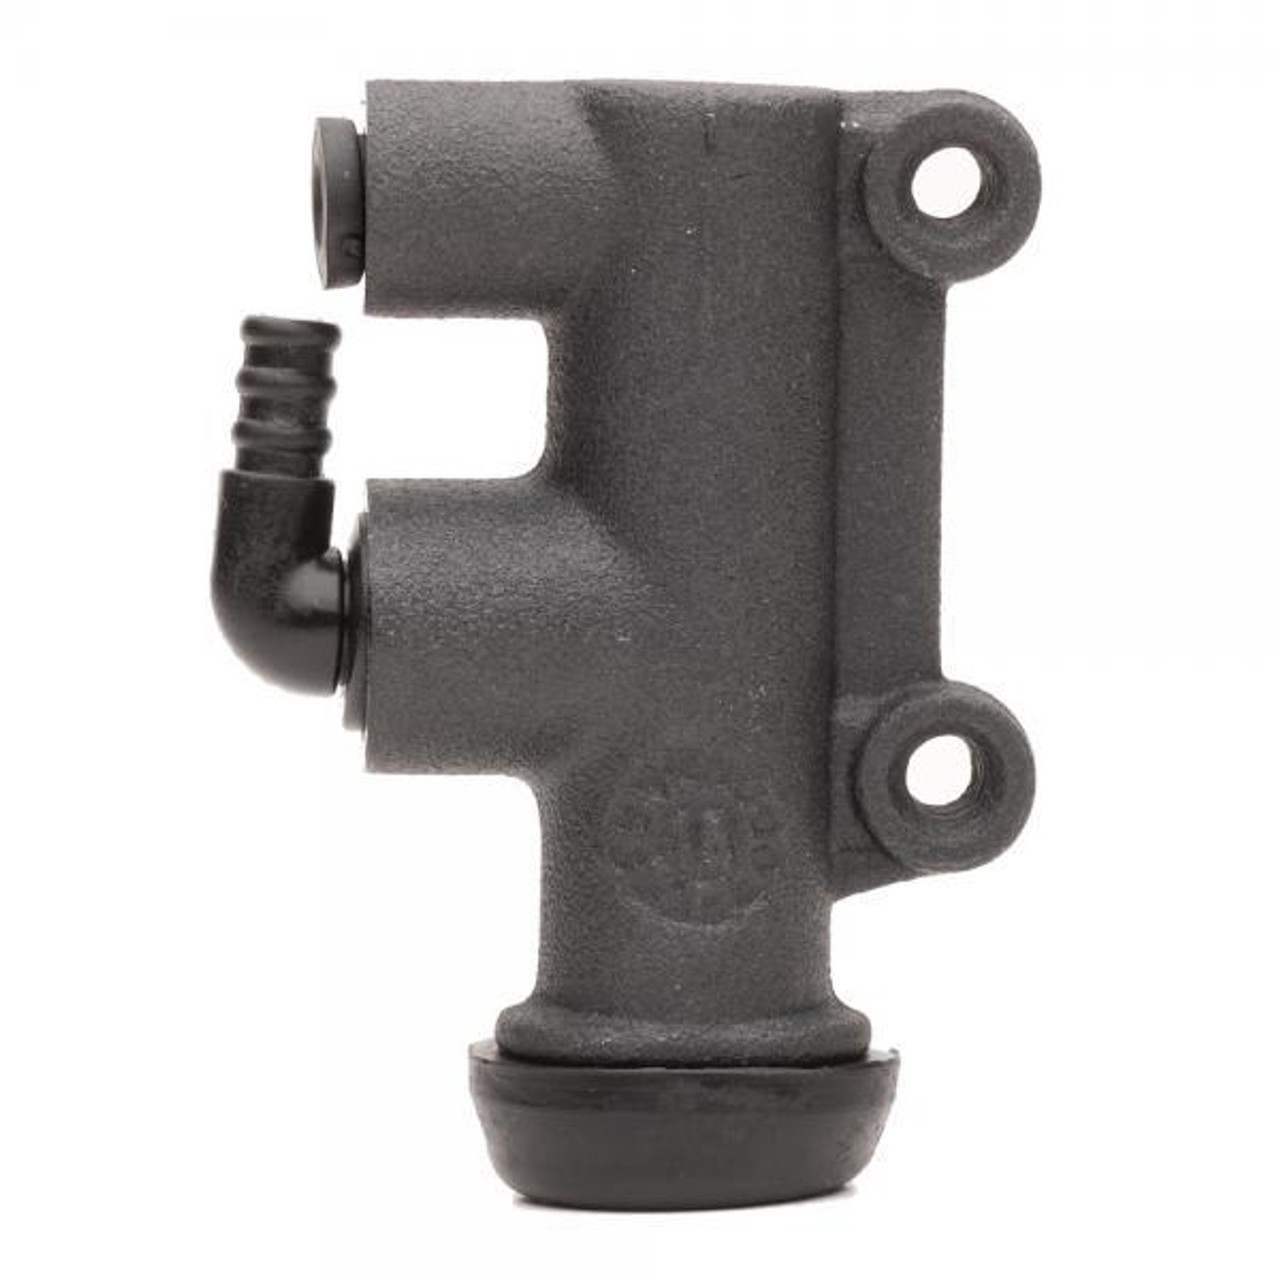 Use with this Master Cylinder. GASGAS Pro 02-10